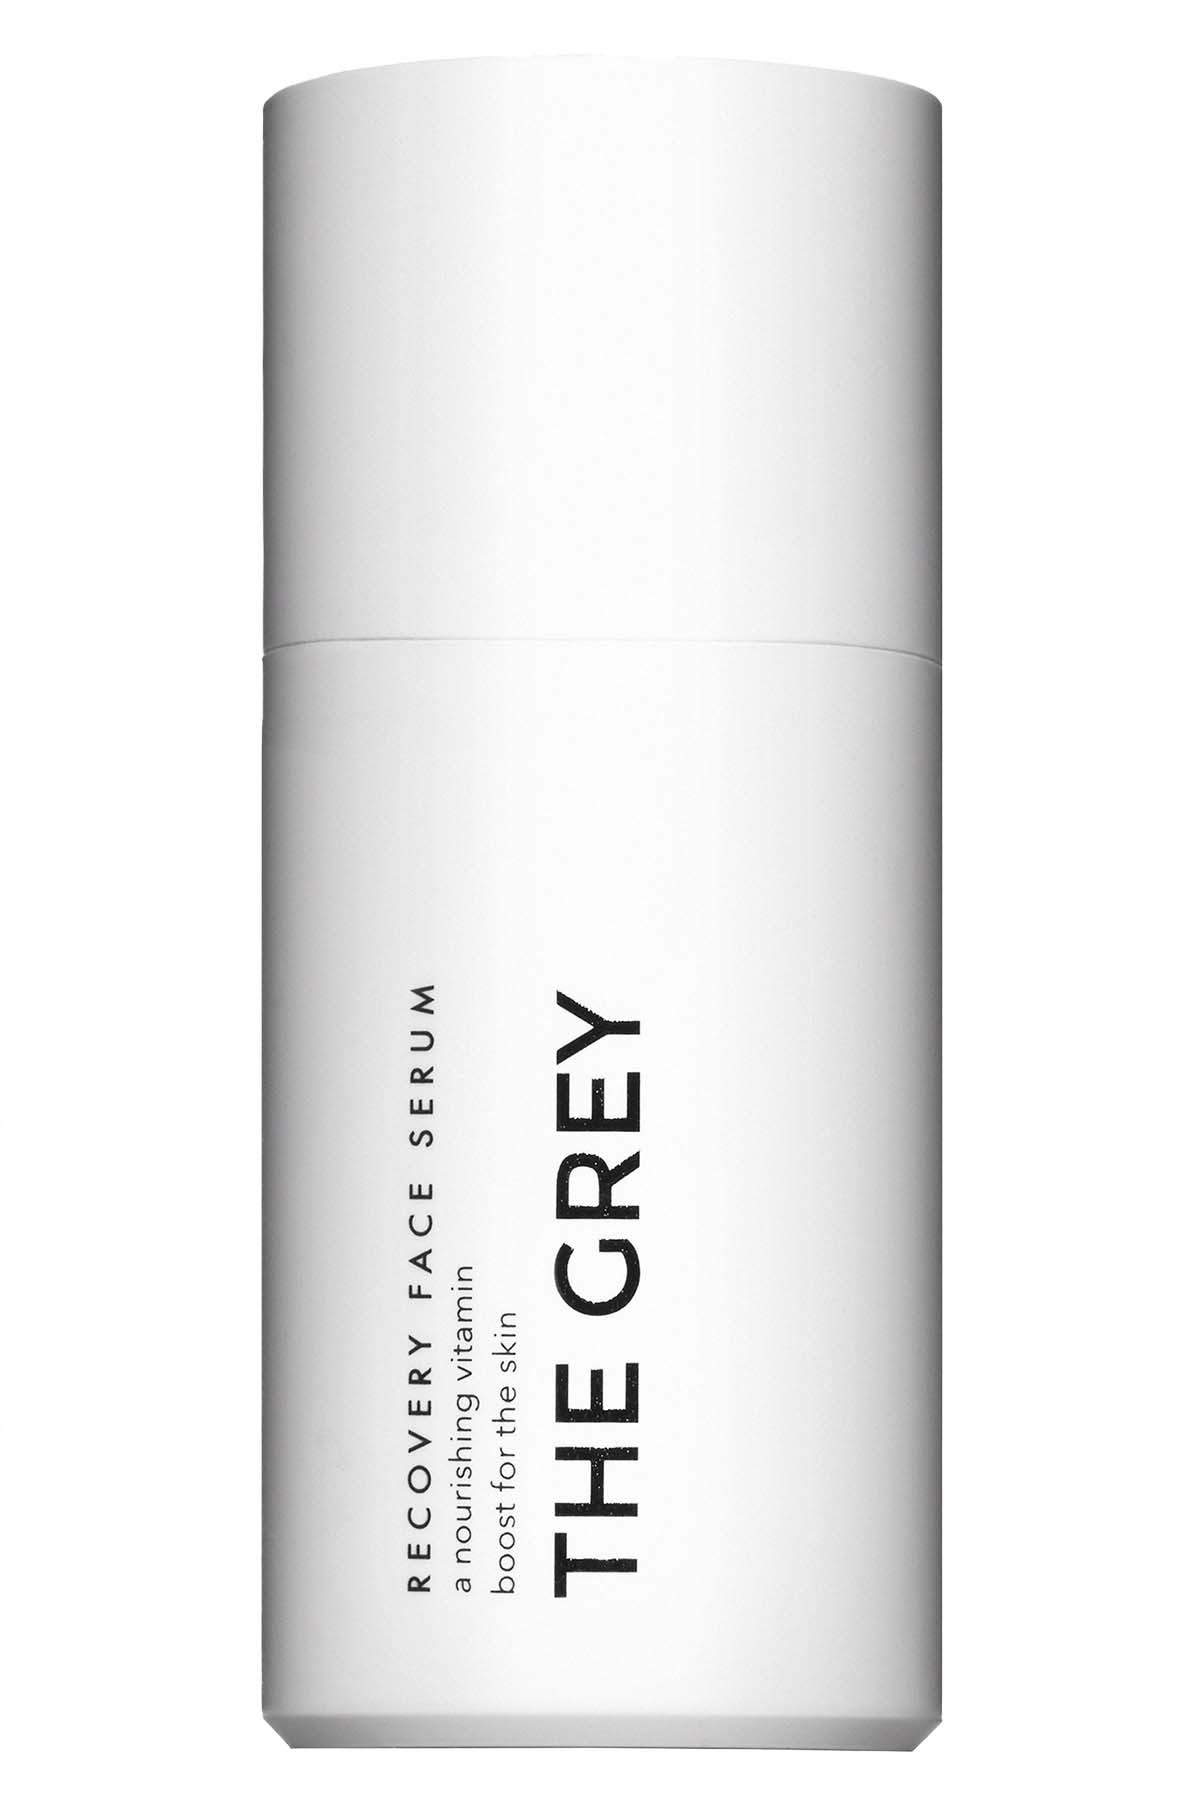 The Grey Men's Skincare Recovery Face Serum 30ML